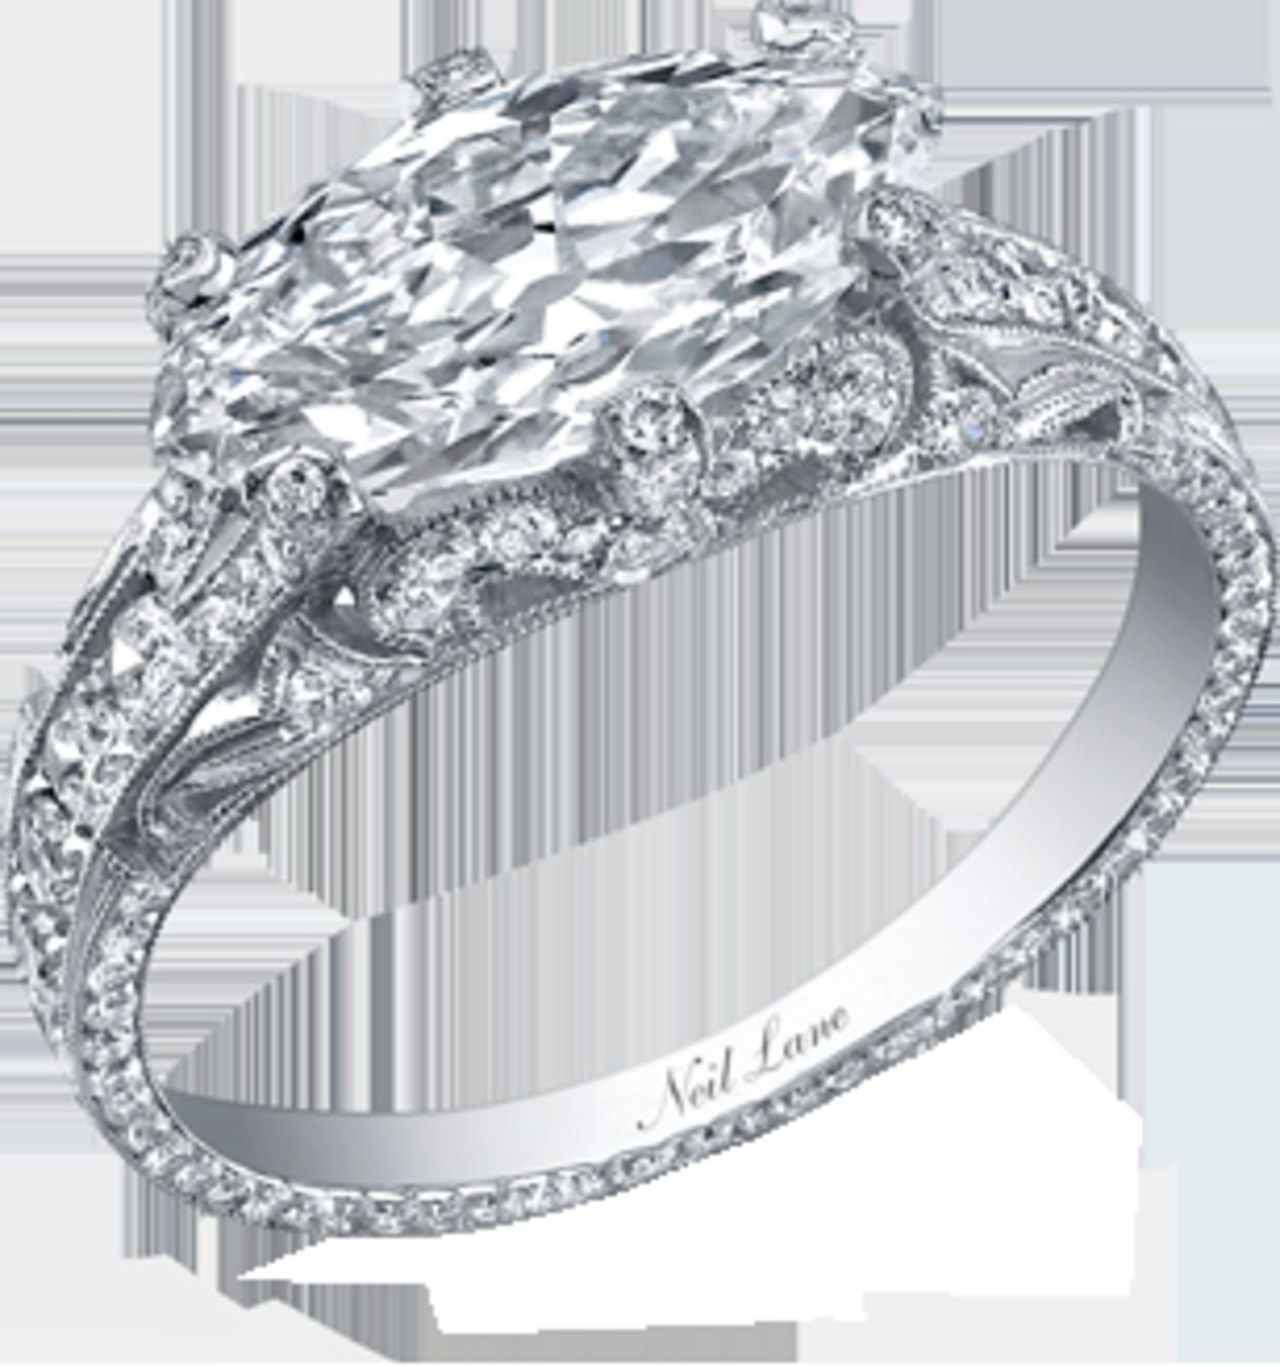 2 east west engagement rings 0306 courtesy